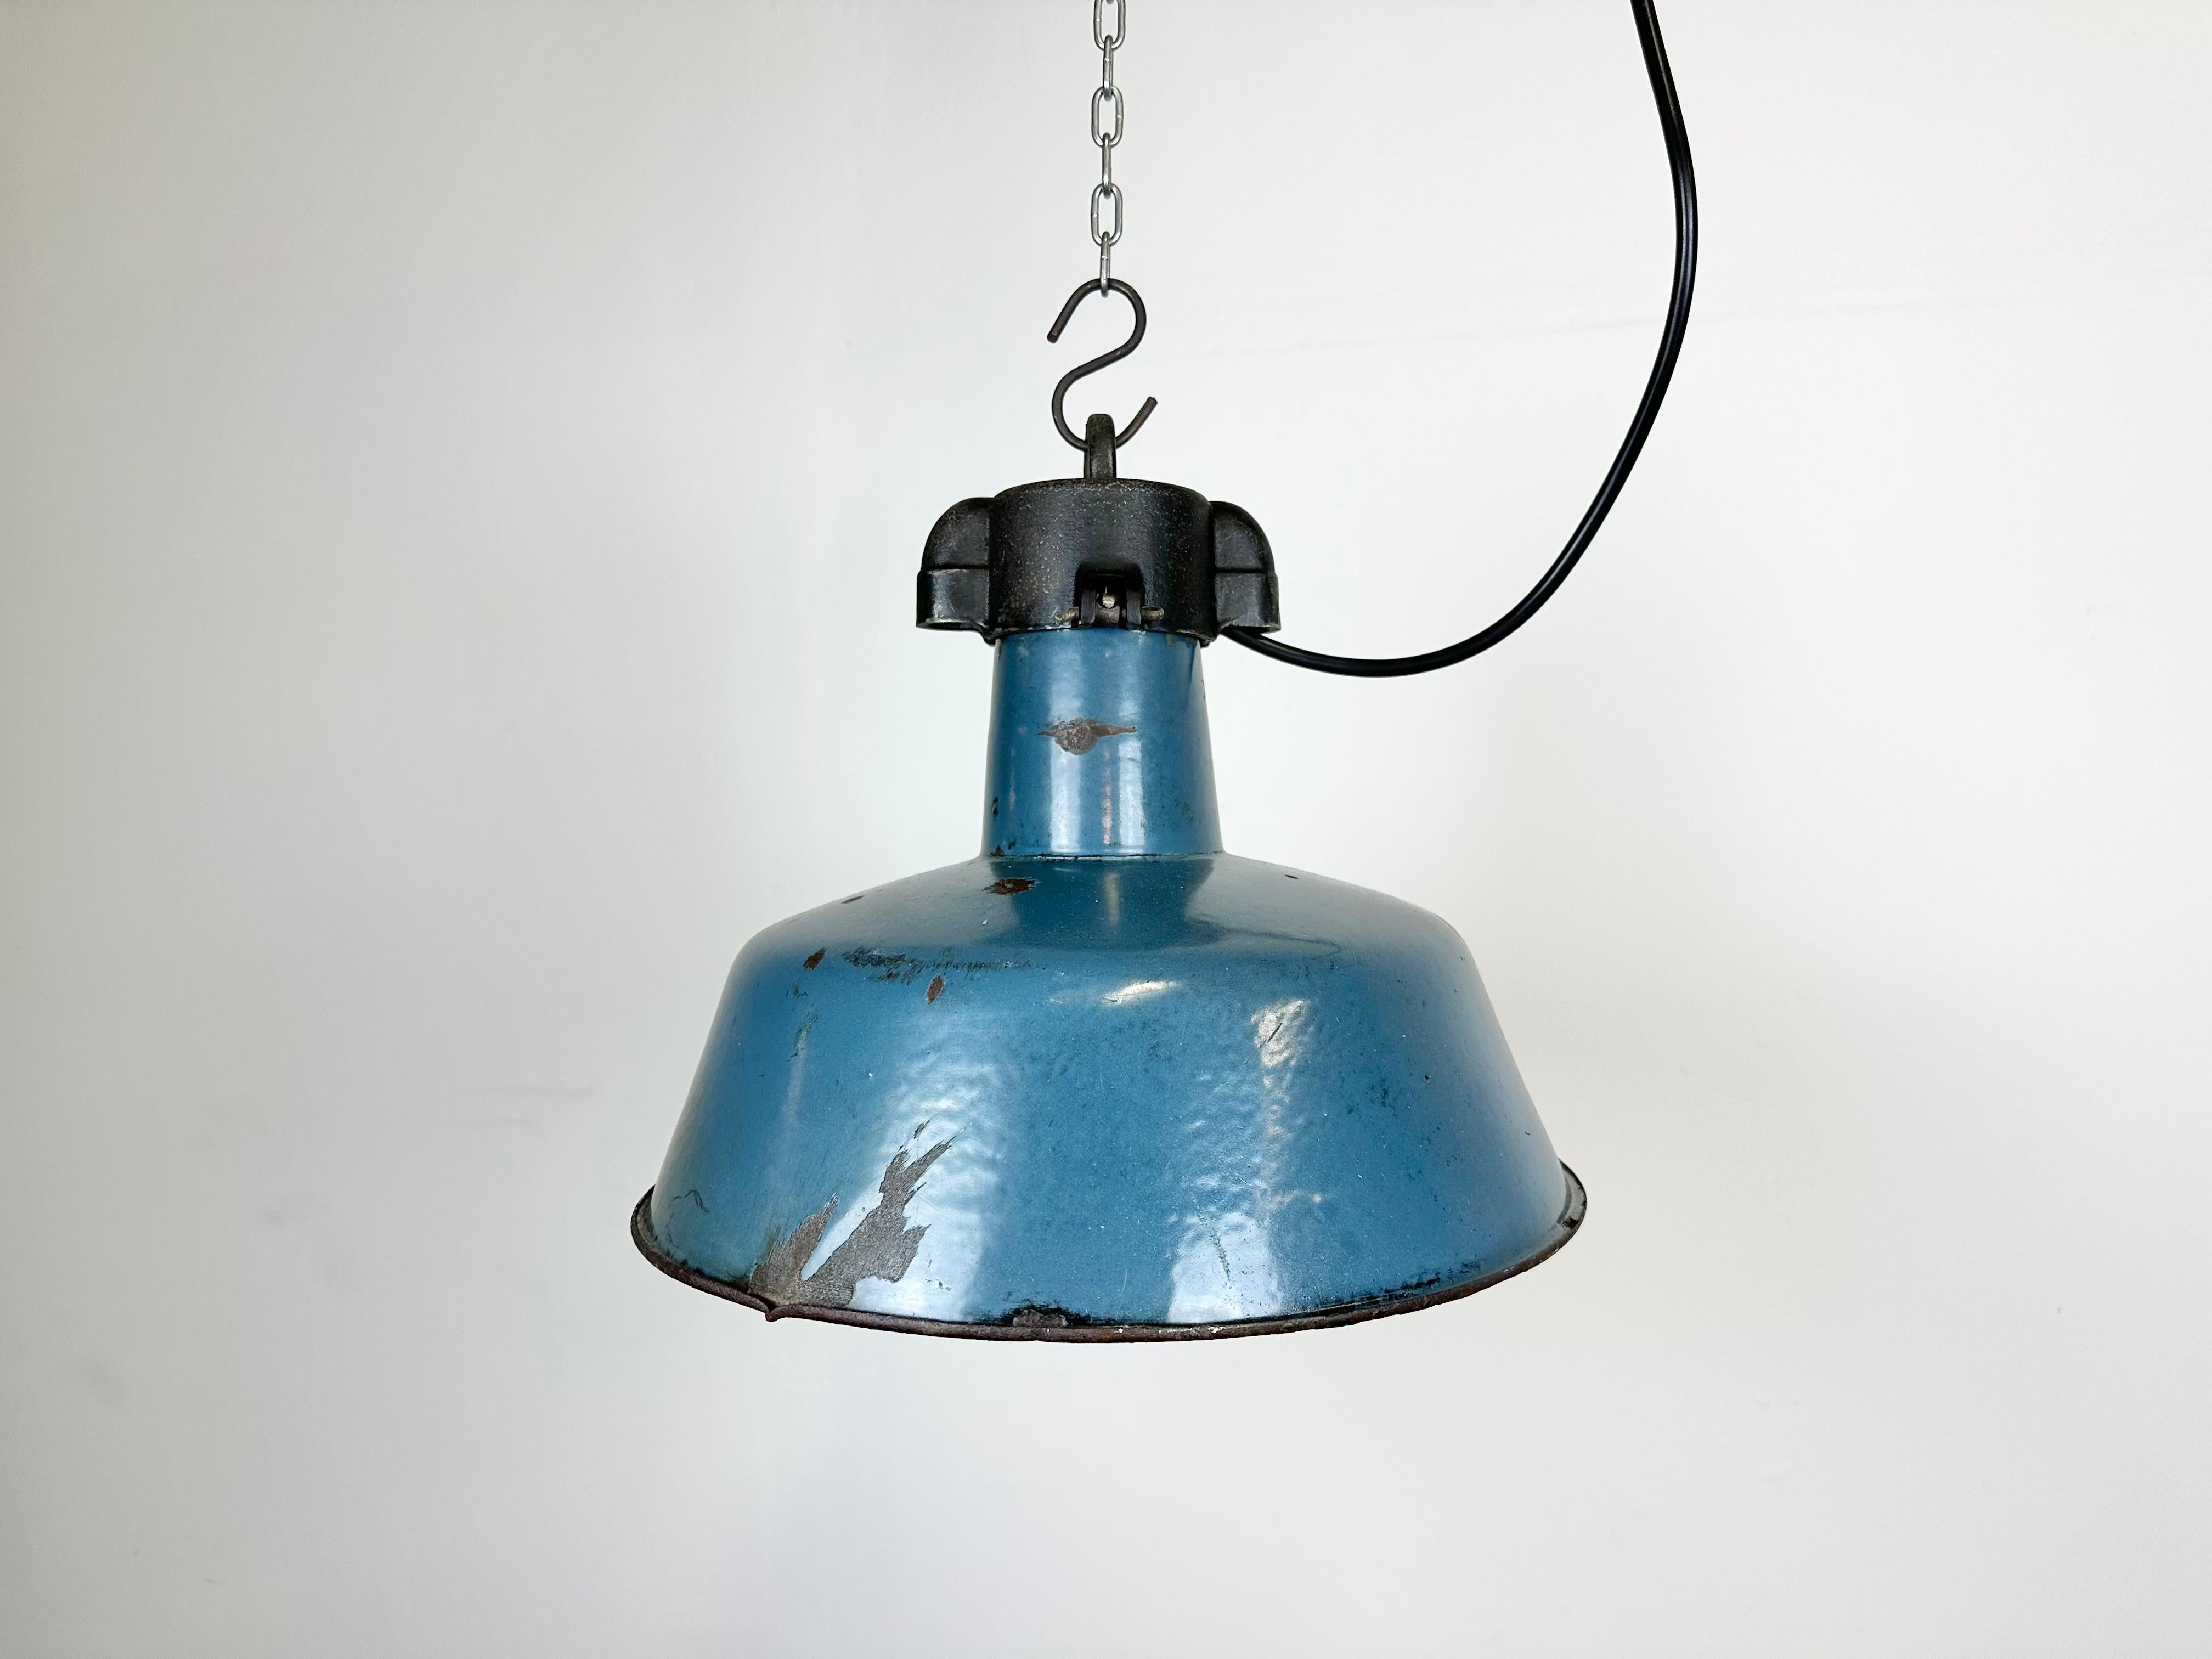 Industrial blue enamel pendant light made by Polam Wilkasy in Poland during the 1960s. White enamel inside the shade. Cast iron top. The porcelain socket requires E 27/ E 26 light bulbs. New wire. The weight of the lamp is 2 kg.